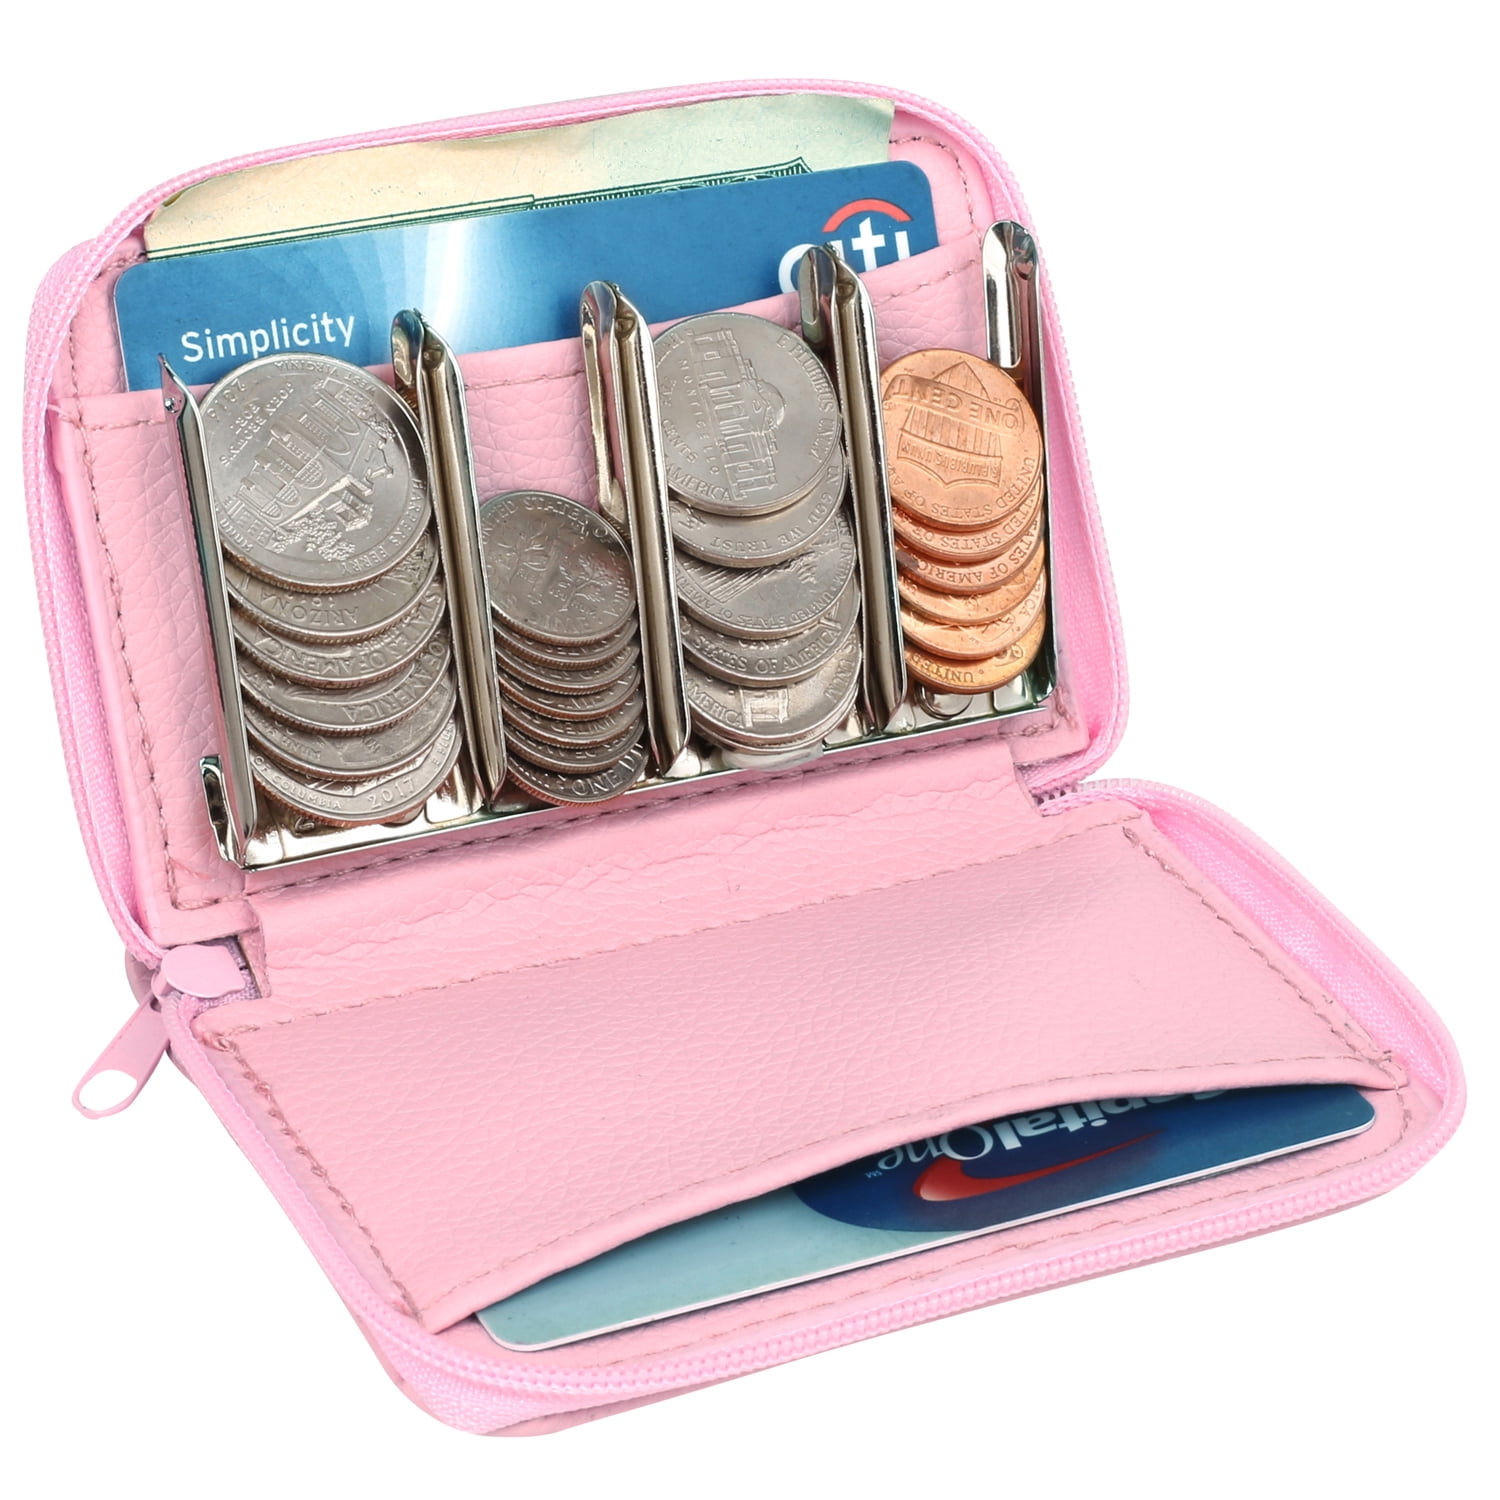 Wallet And Coin Sorter Trusty Coin Pouch,For Pocket Purse Or Car For Quick Change black 